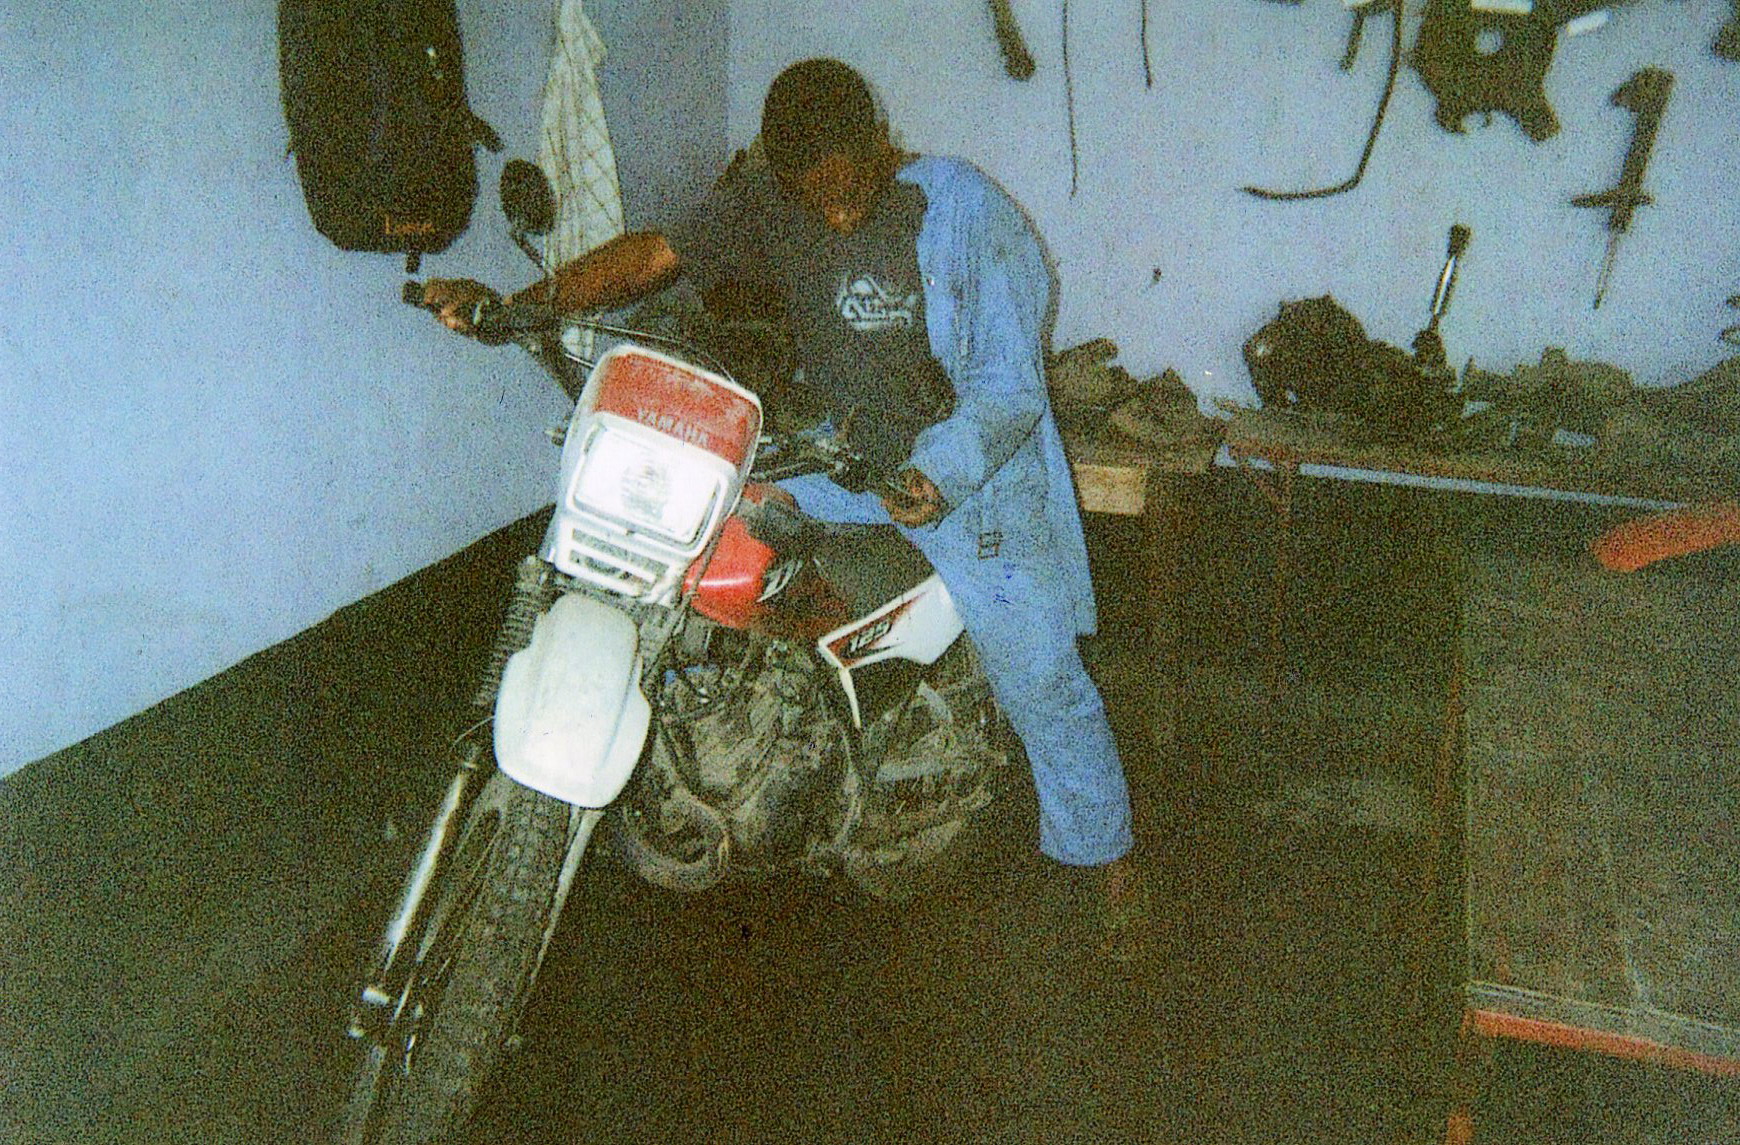  I have repaired a motorbike and trying it to check if it is well fixed.&nbsp; 